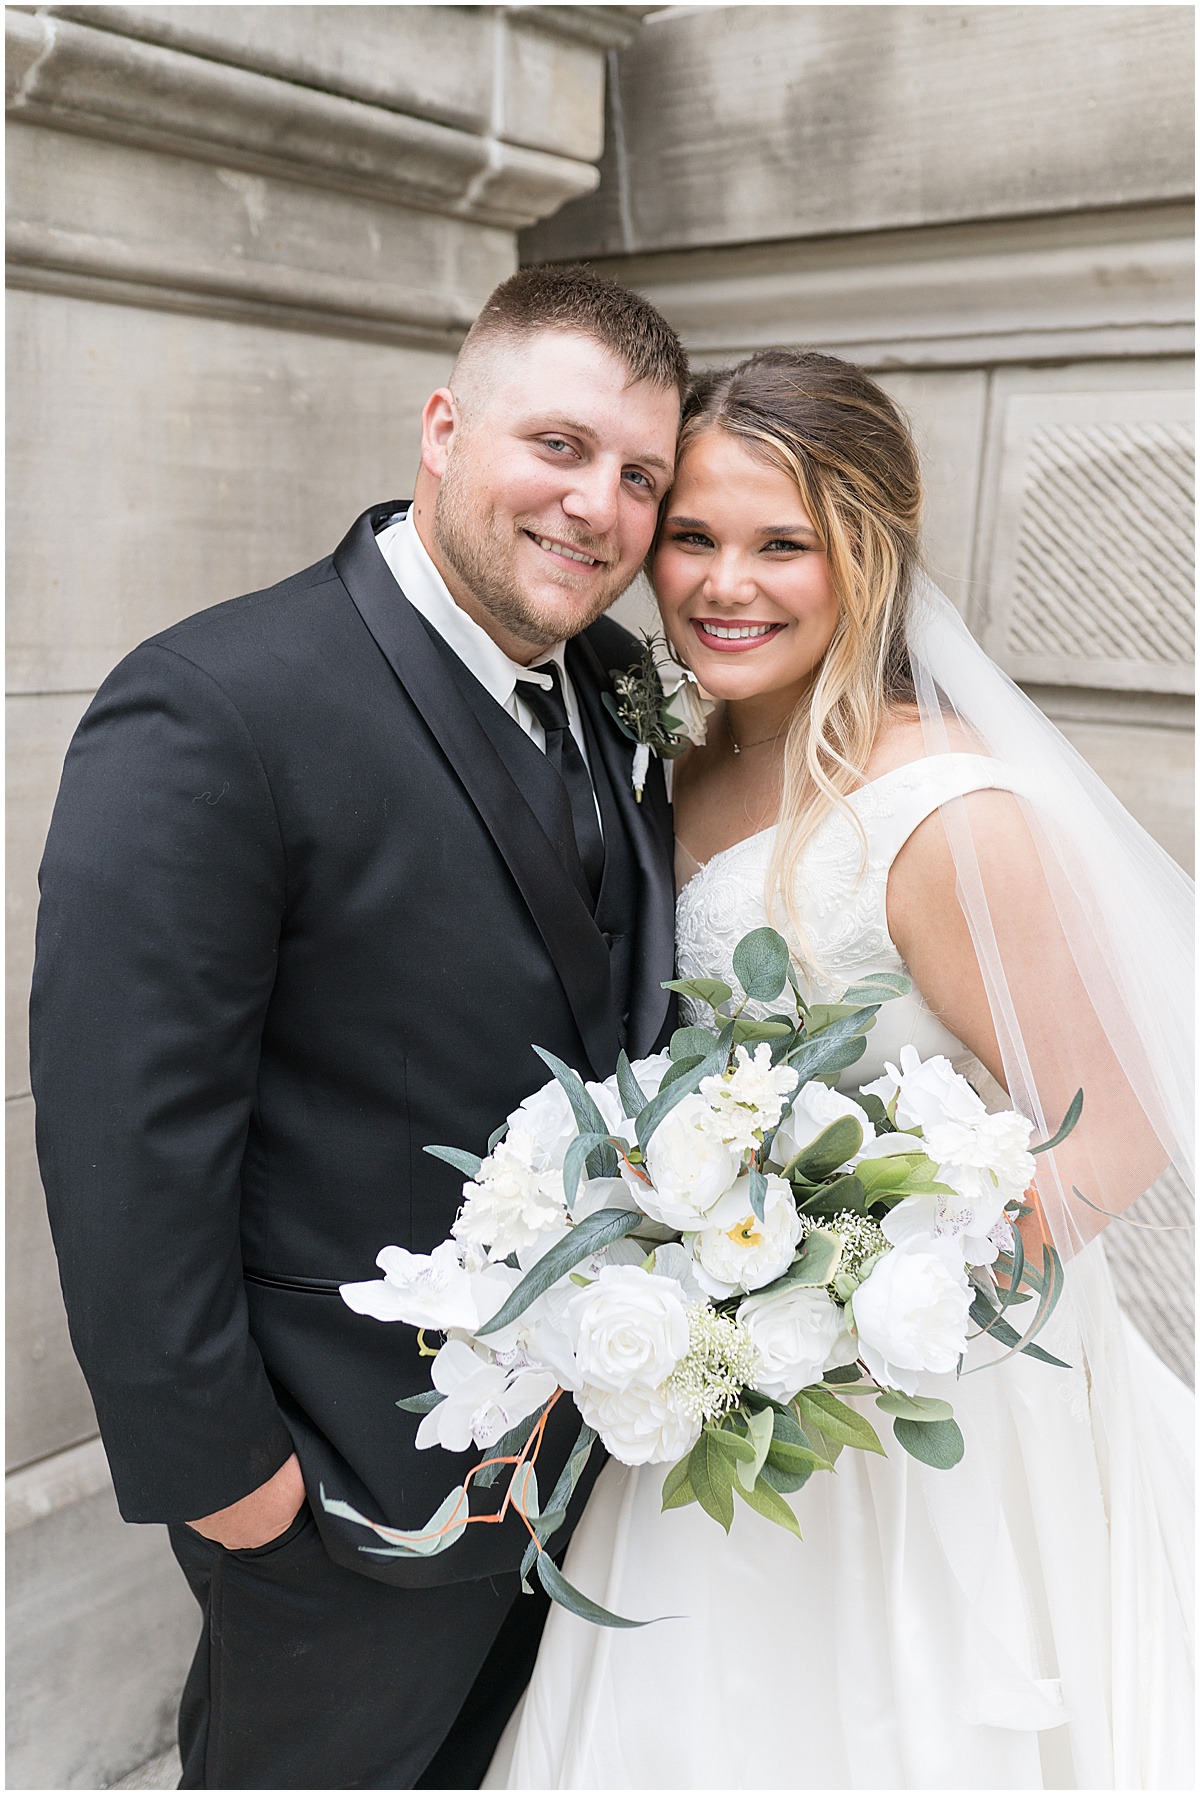 Bride and groom pose by stonework during wedding photos at Hamilton County Courthouse in downtown Noblesville, Indiana 